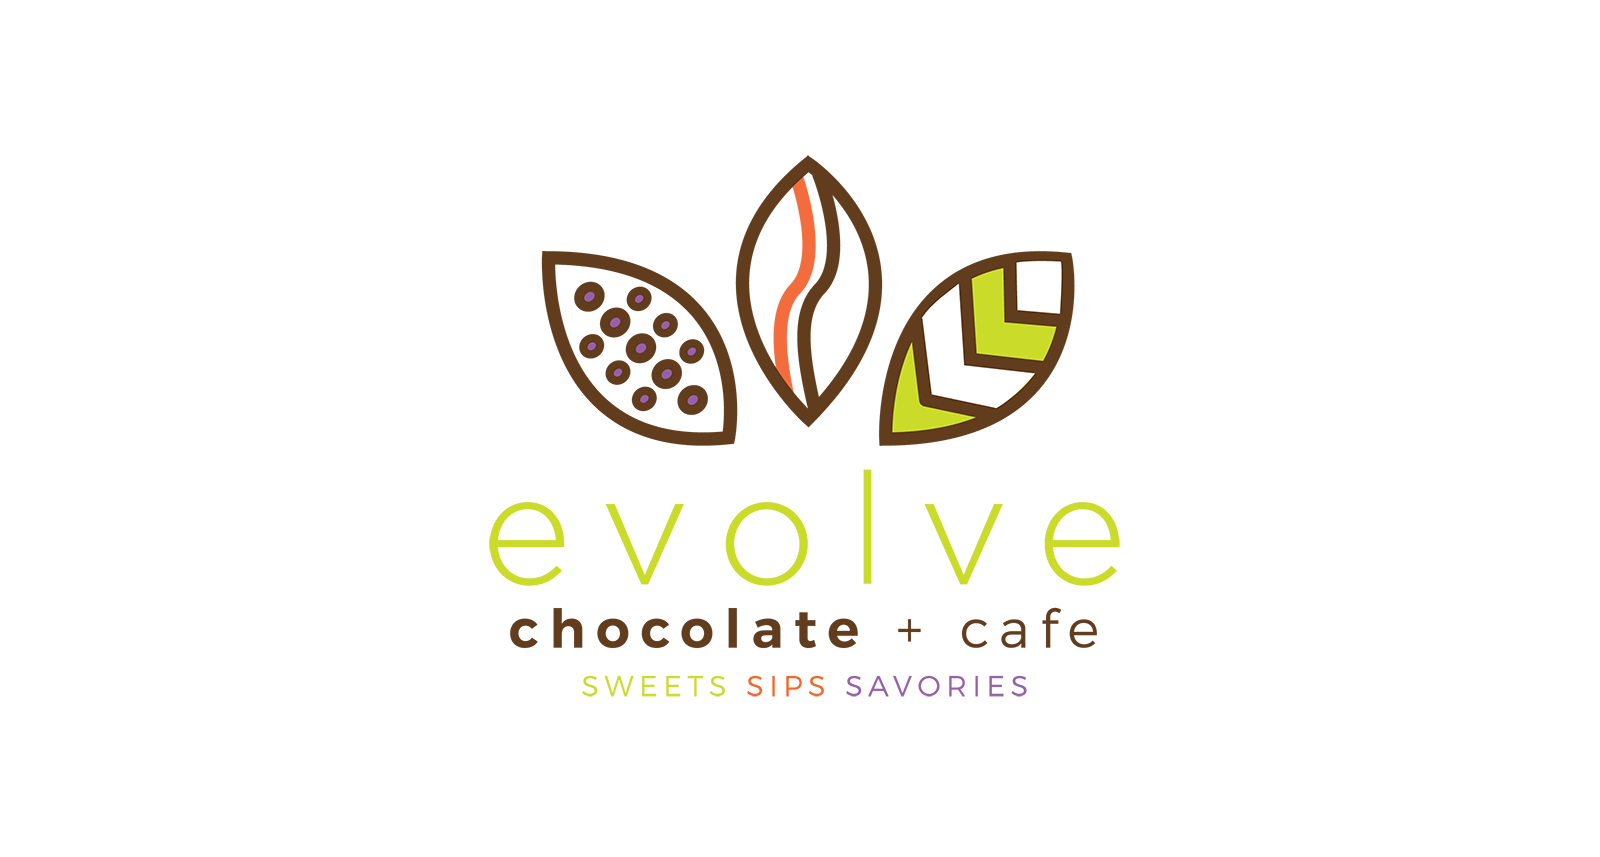 Evolve Chocolate and Cafe